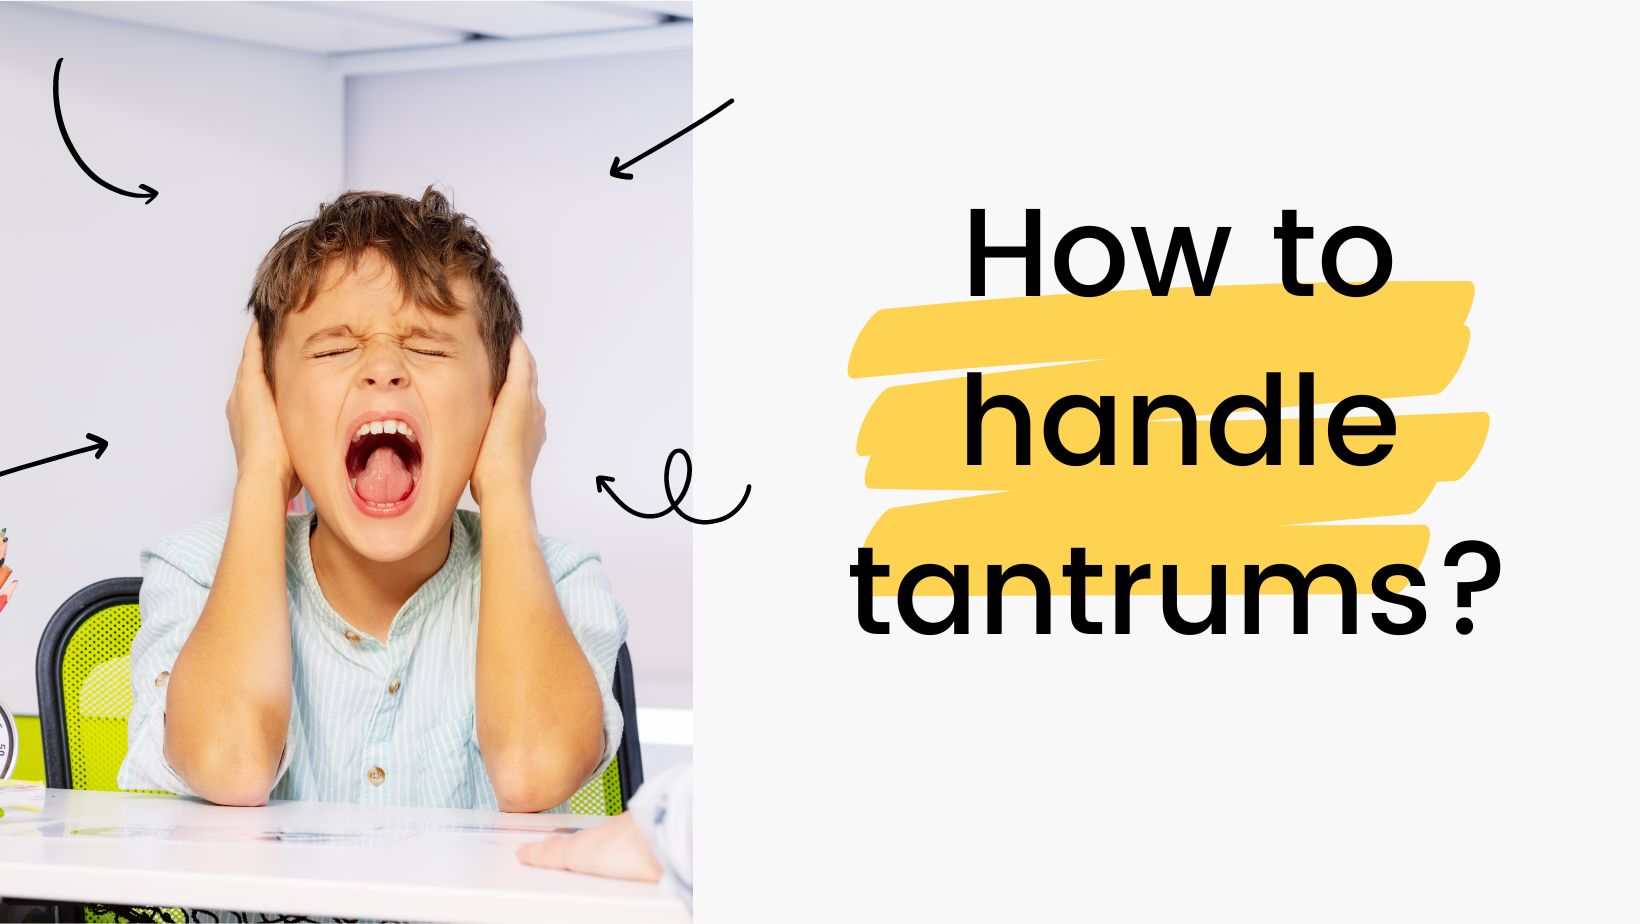 How to handle tantrums?